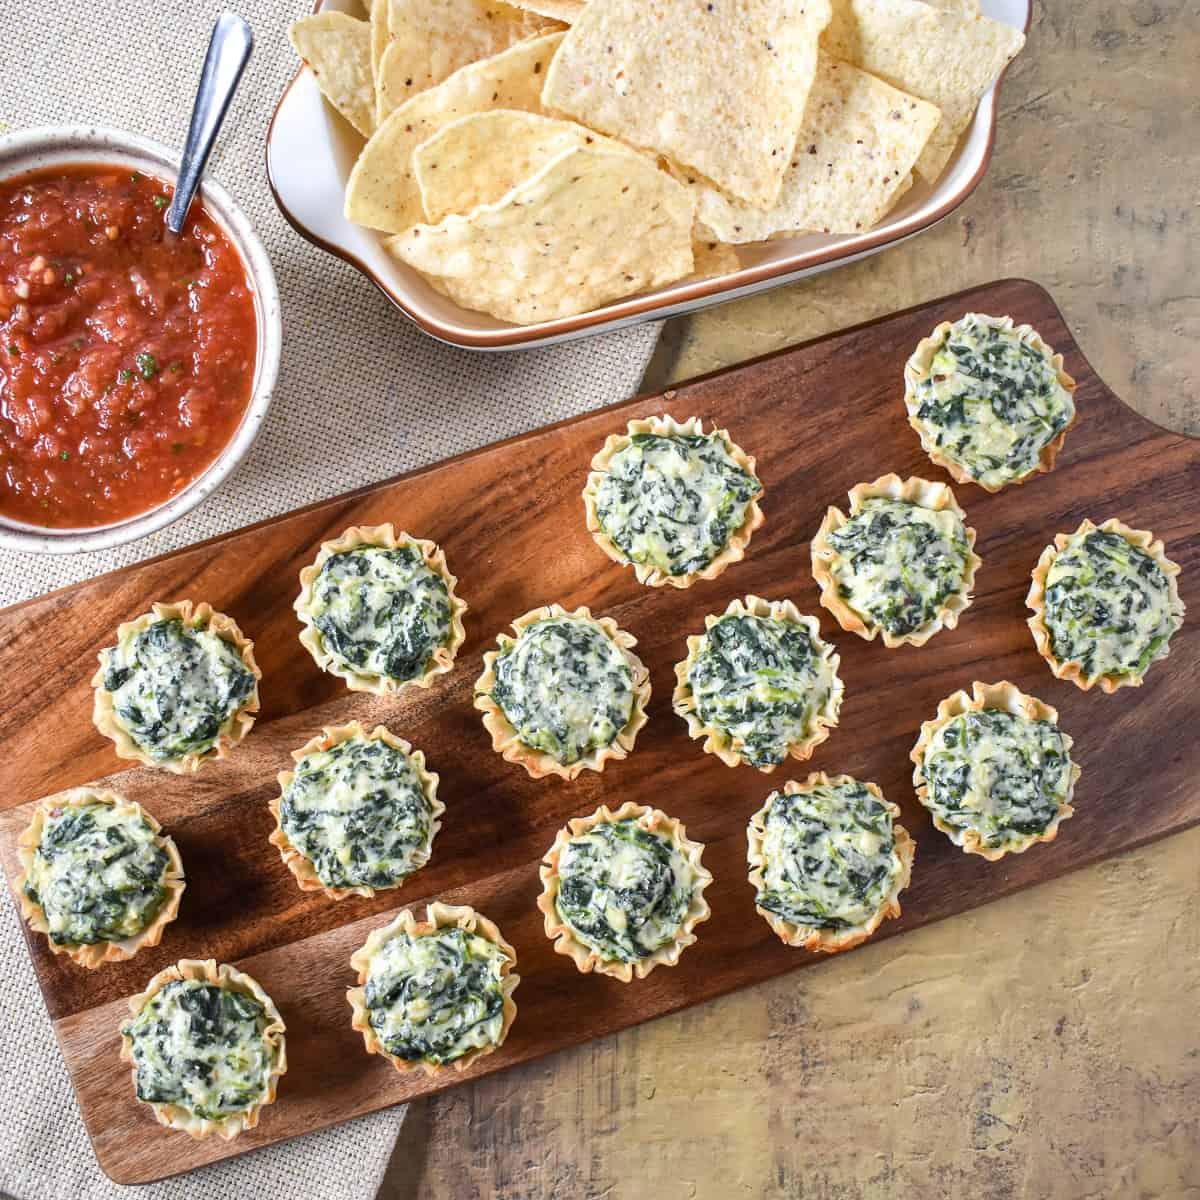 The spinach artichoke bites served on a wood board with salsa and chips in the background.